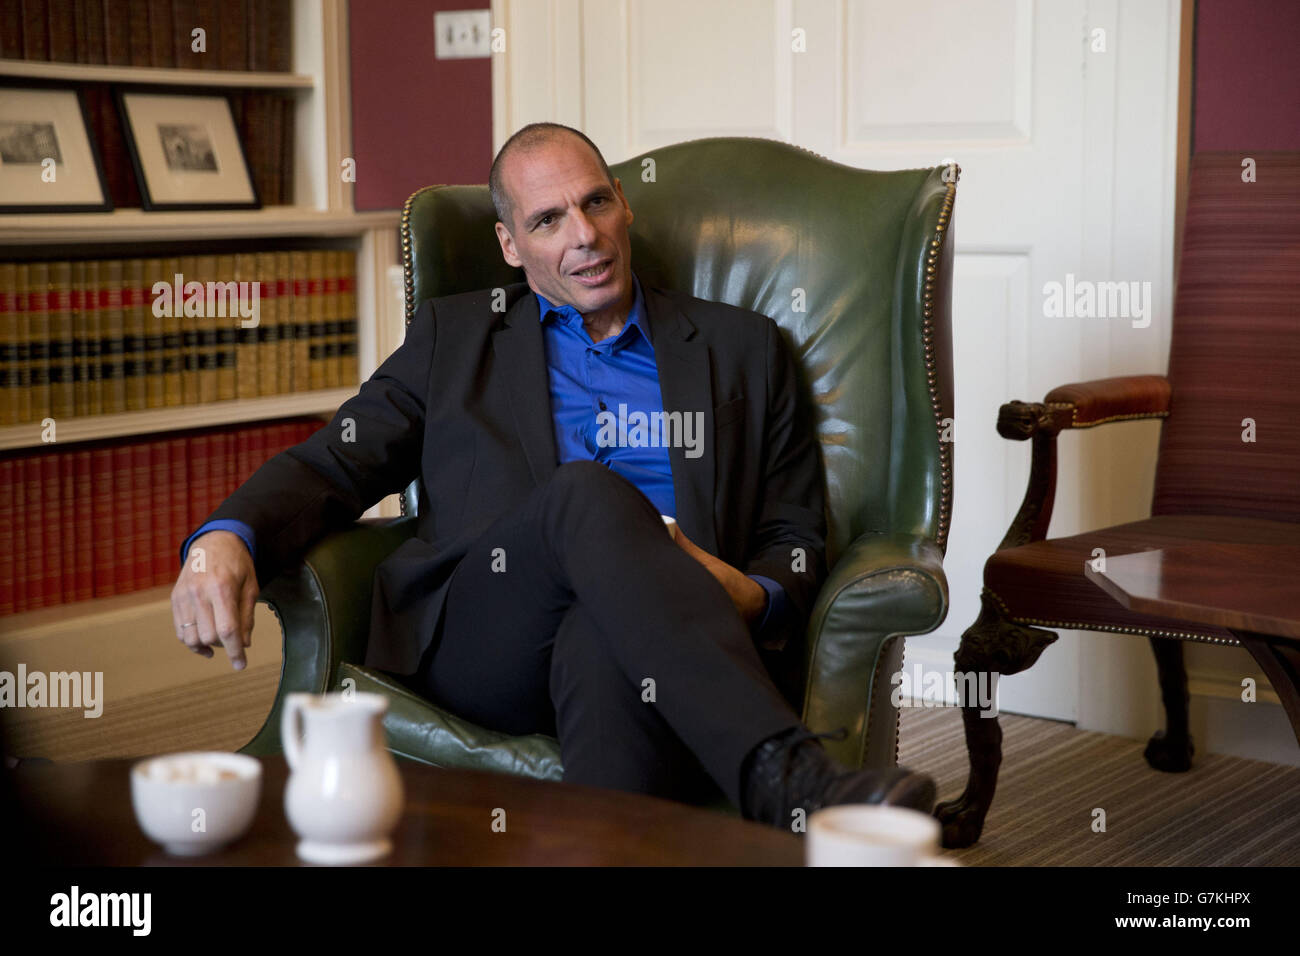 Greece's new anti-austerity finance minister Yanis Varoufakis during a meeting at 11 Downing Street in London, where he met Chancellor George Osborne. Stock Photo